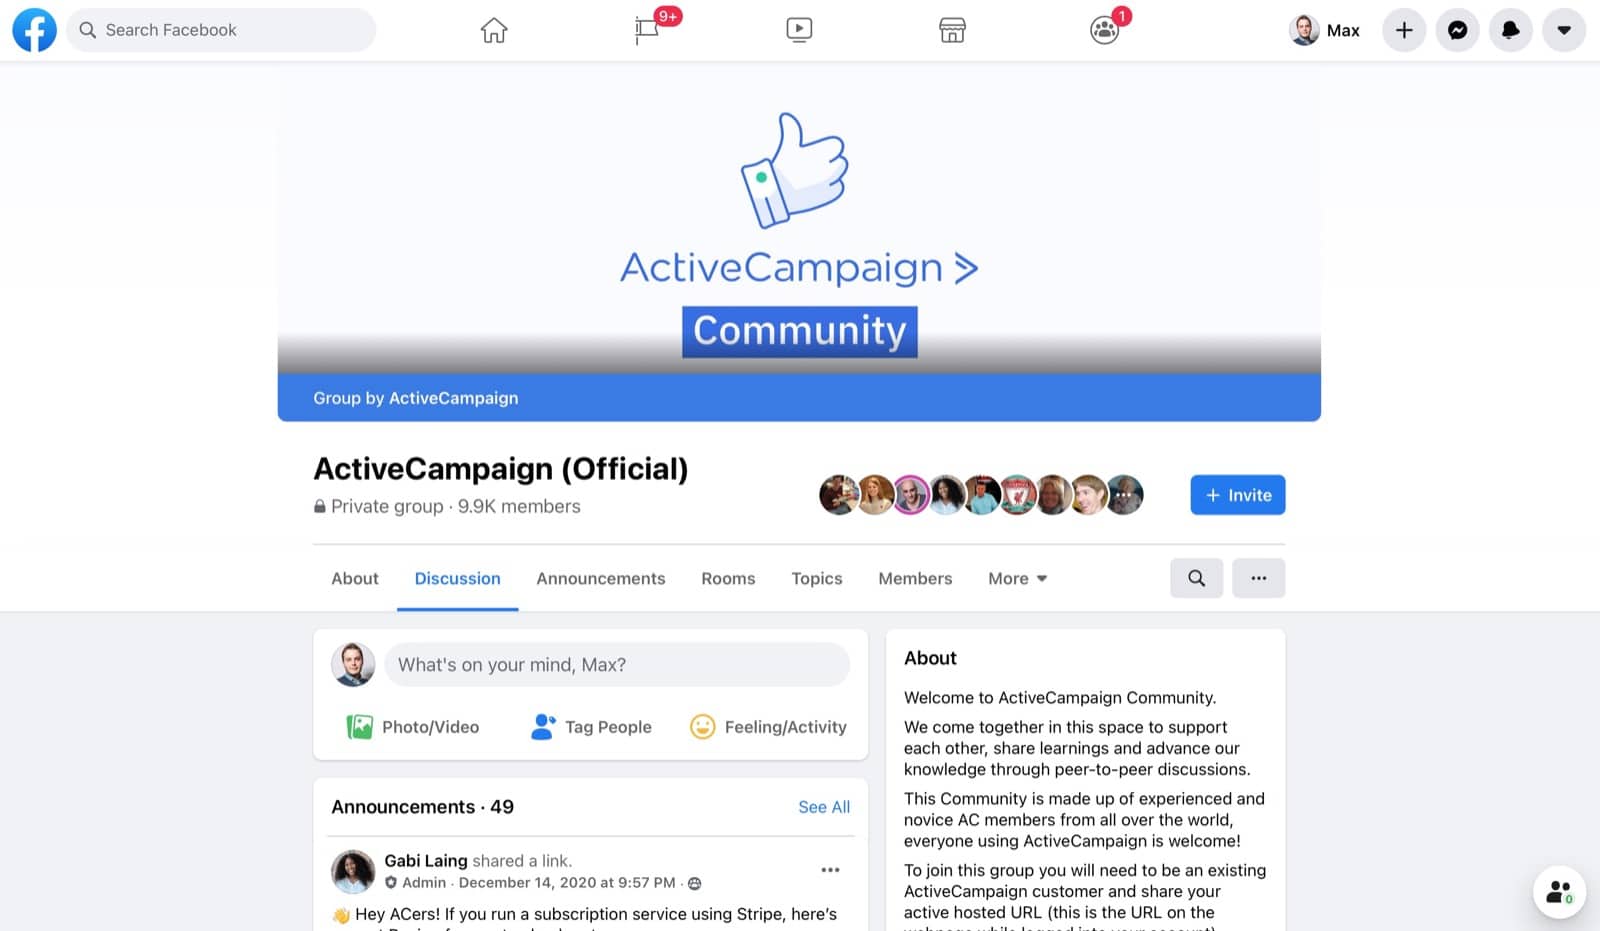 Preview of ActiveCampaign community on Facebook